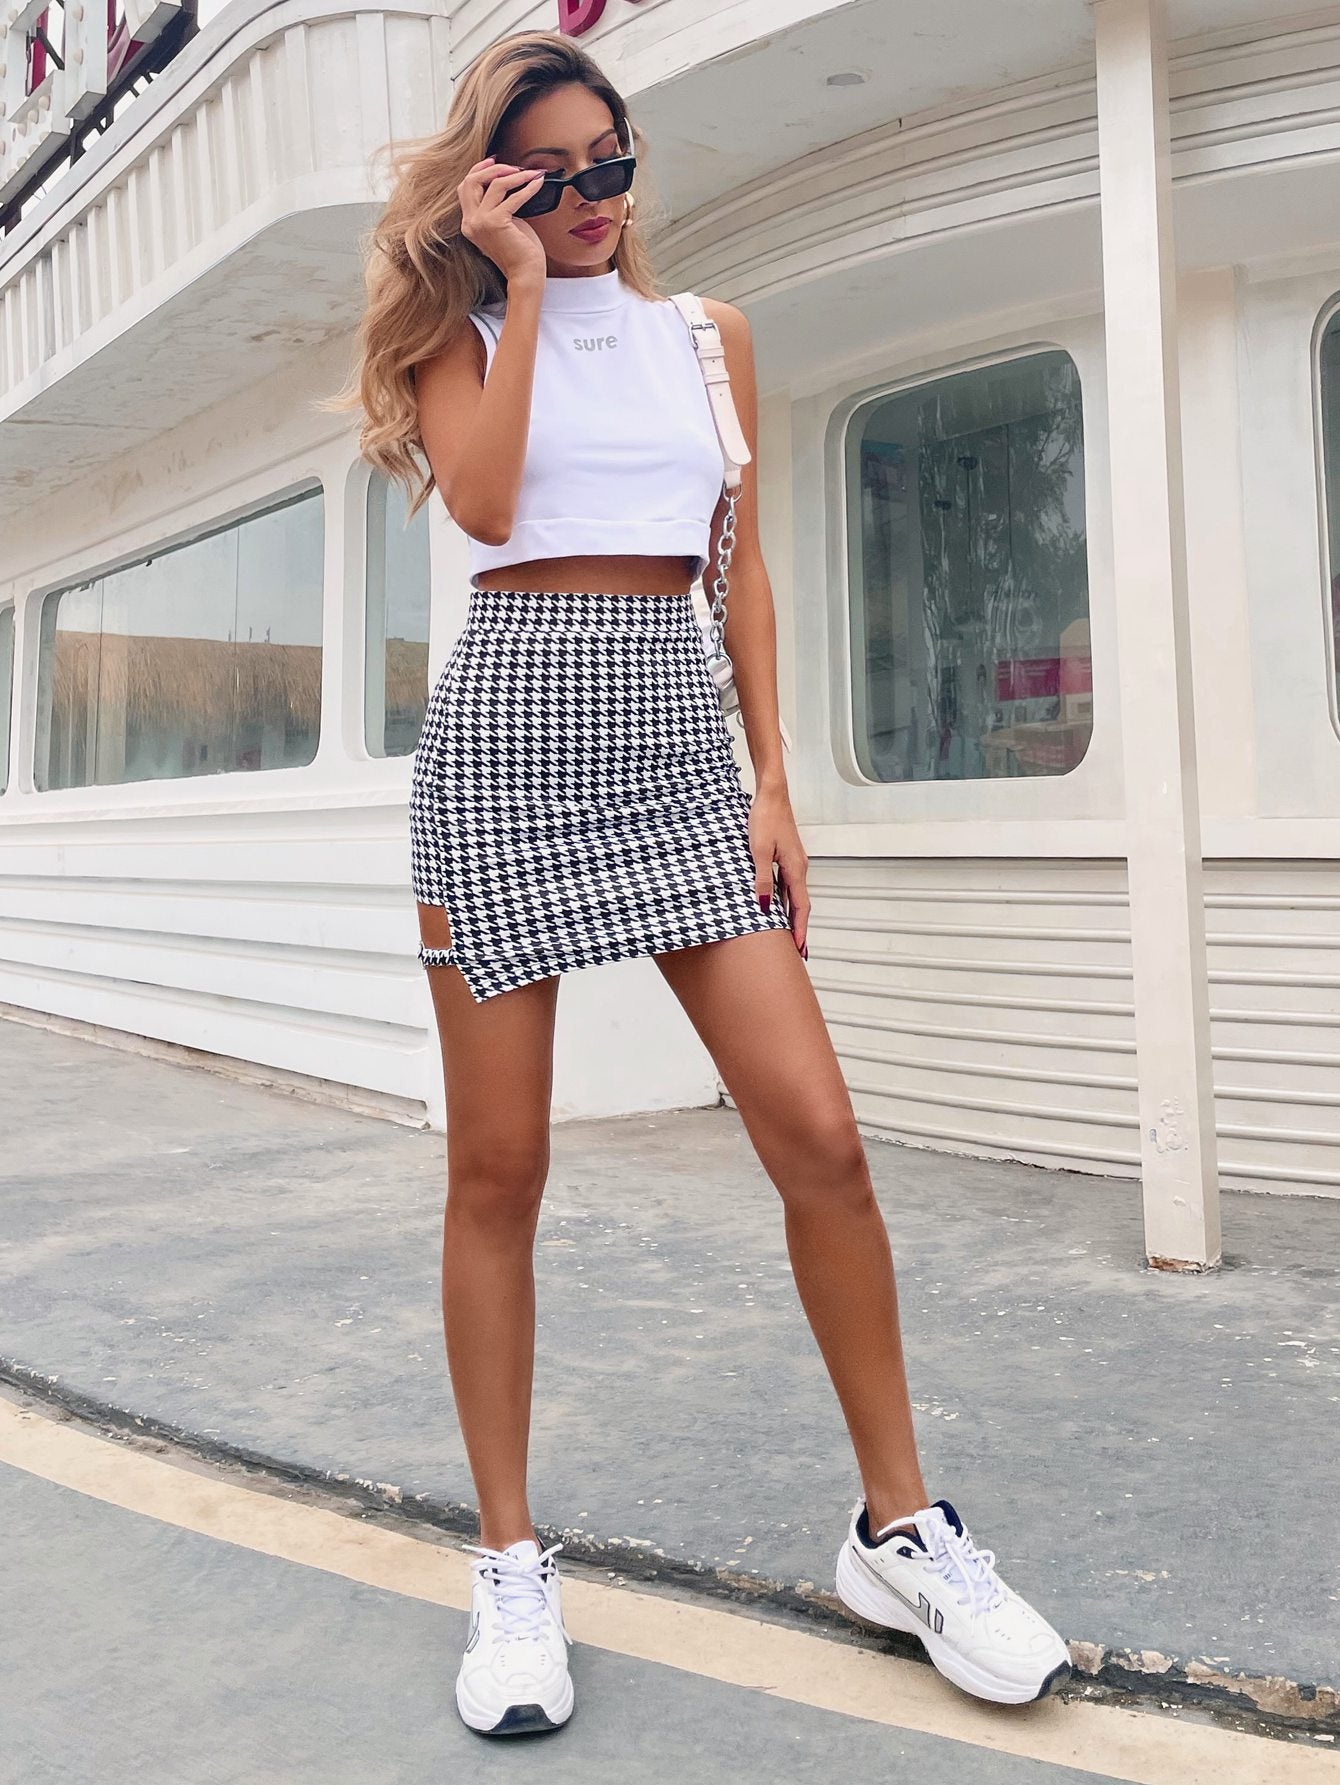 Sexy Houndstooth Mini Skirt in Size s, M, or L